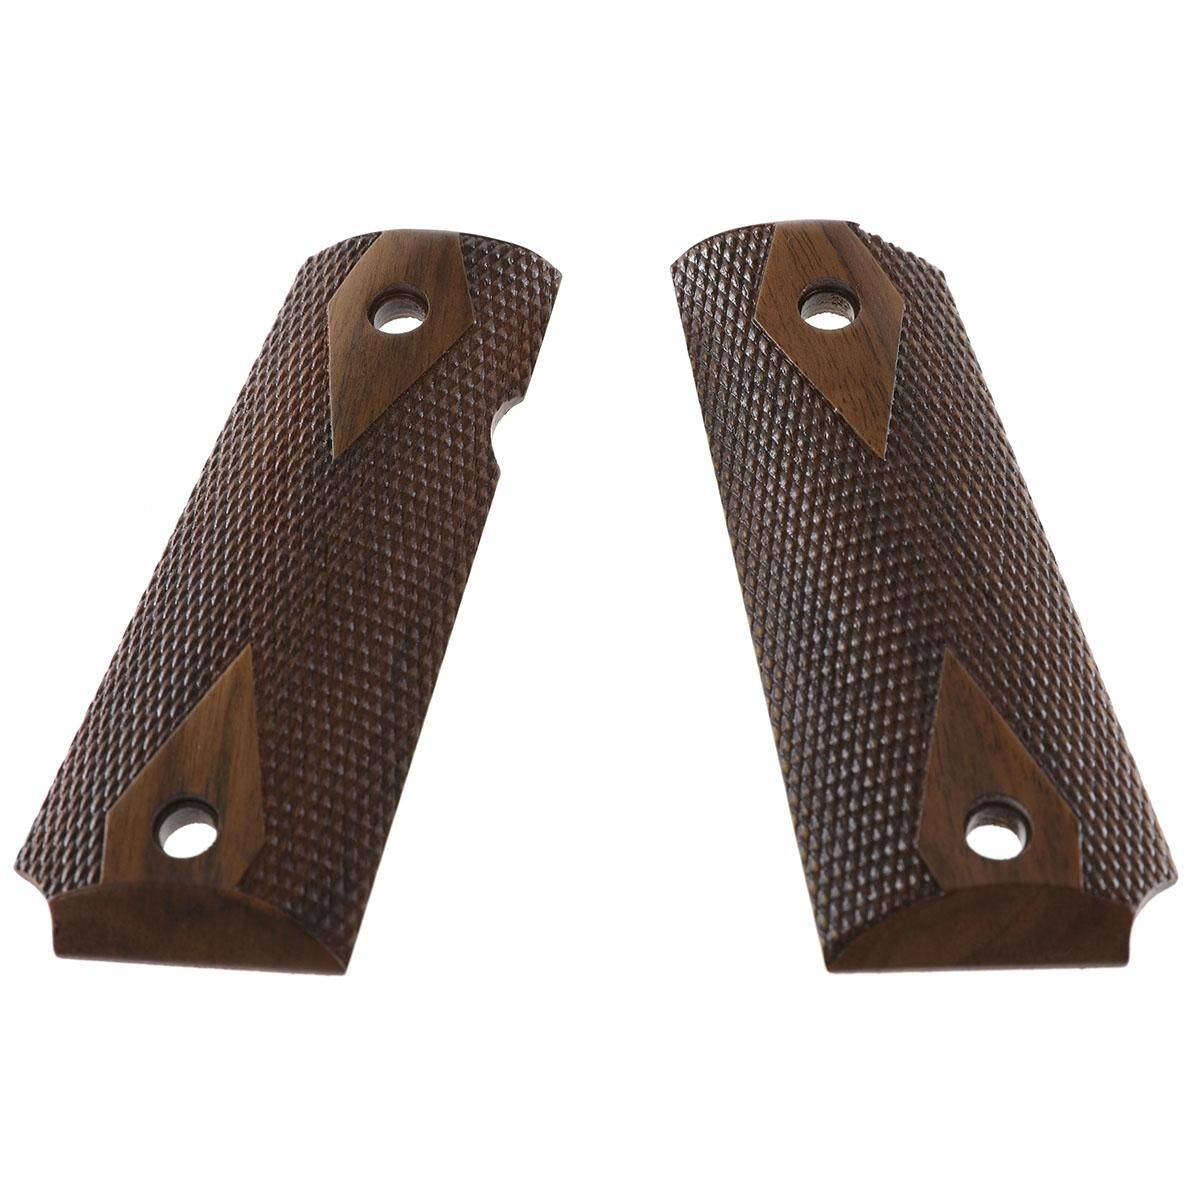 Bul Armory Wooden Grip for 1911 Ultra